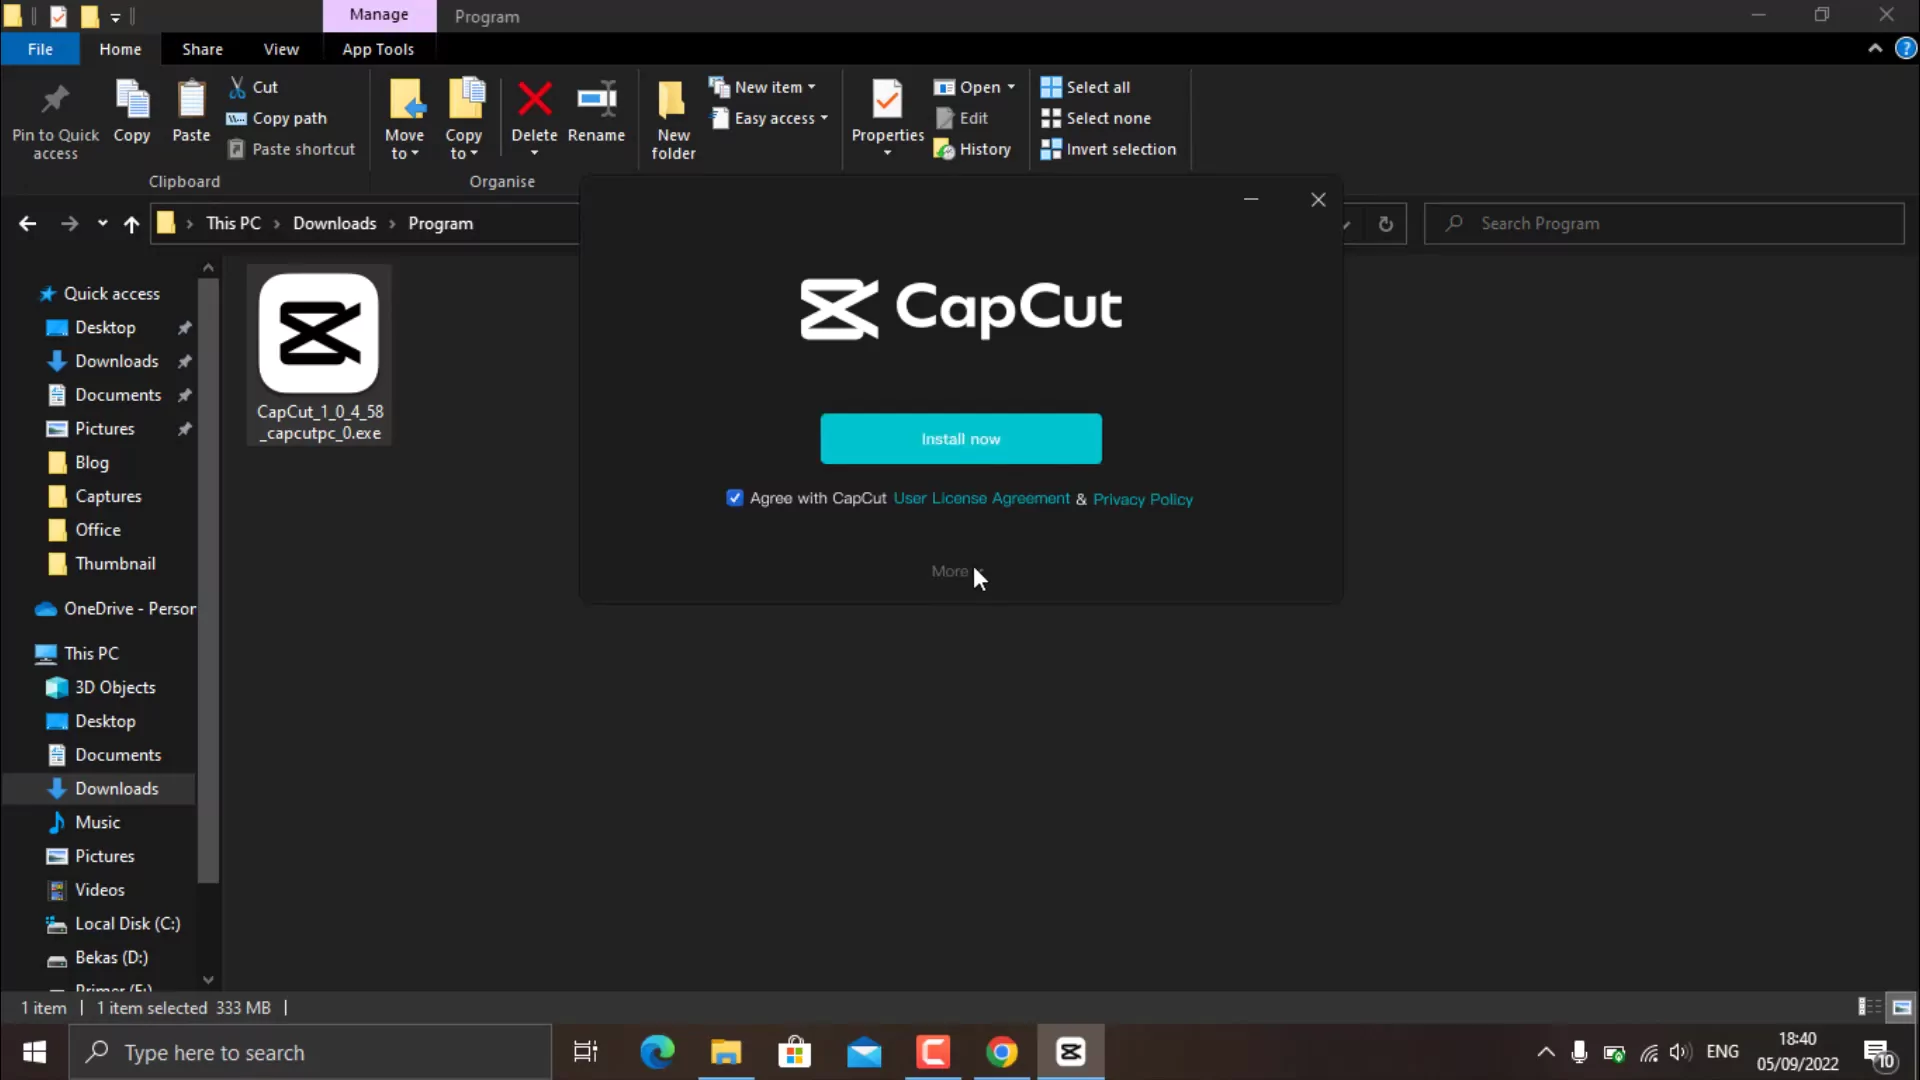 capcut download without emolater